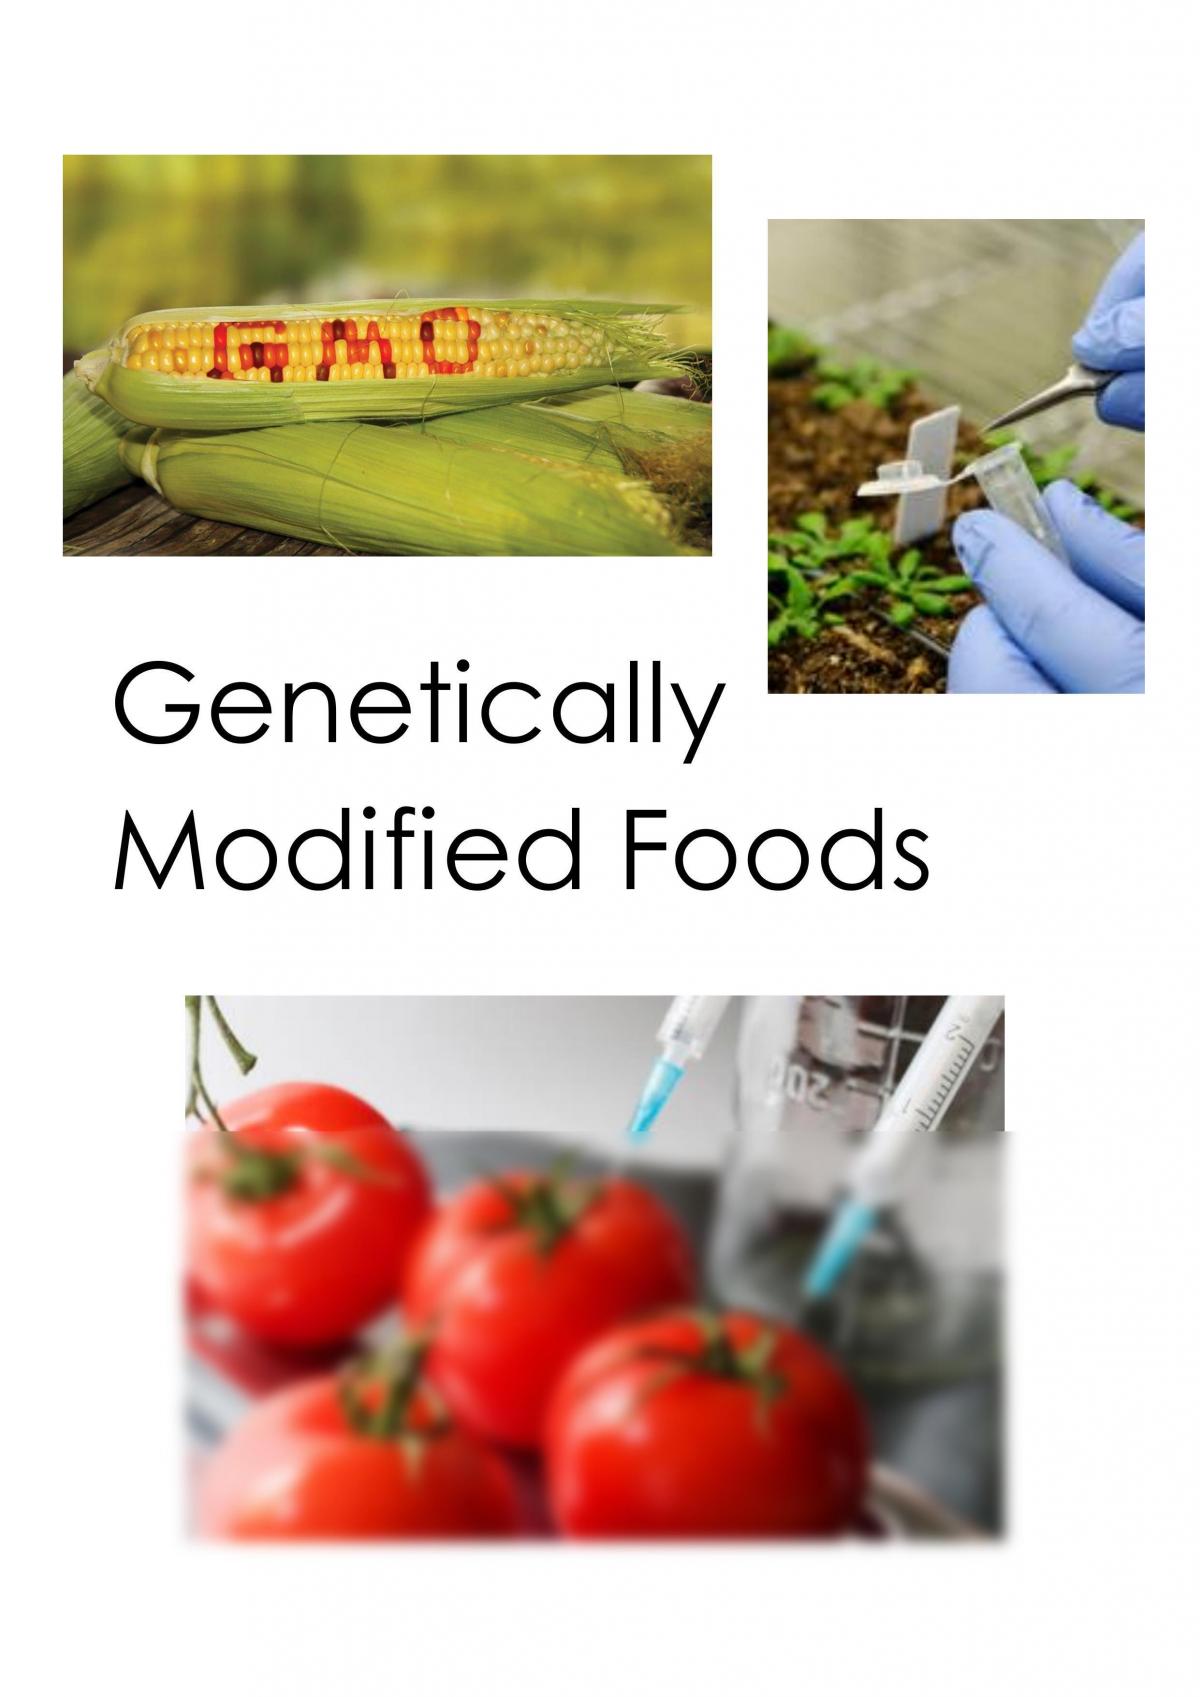 argumentative essay against genetically modified foods